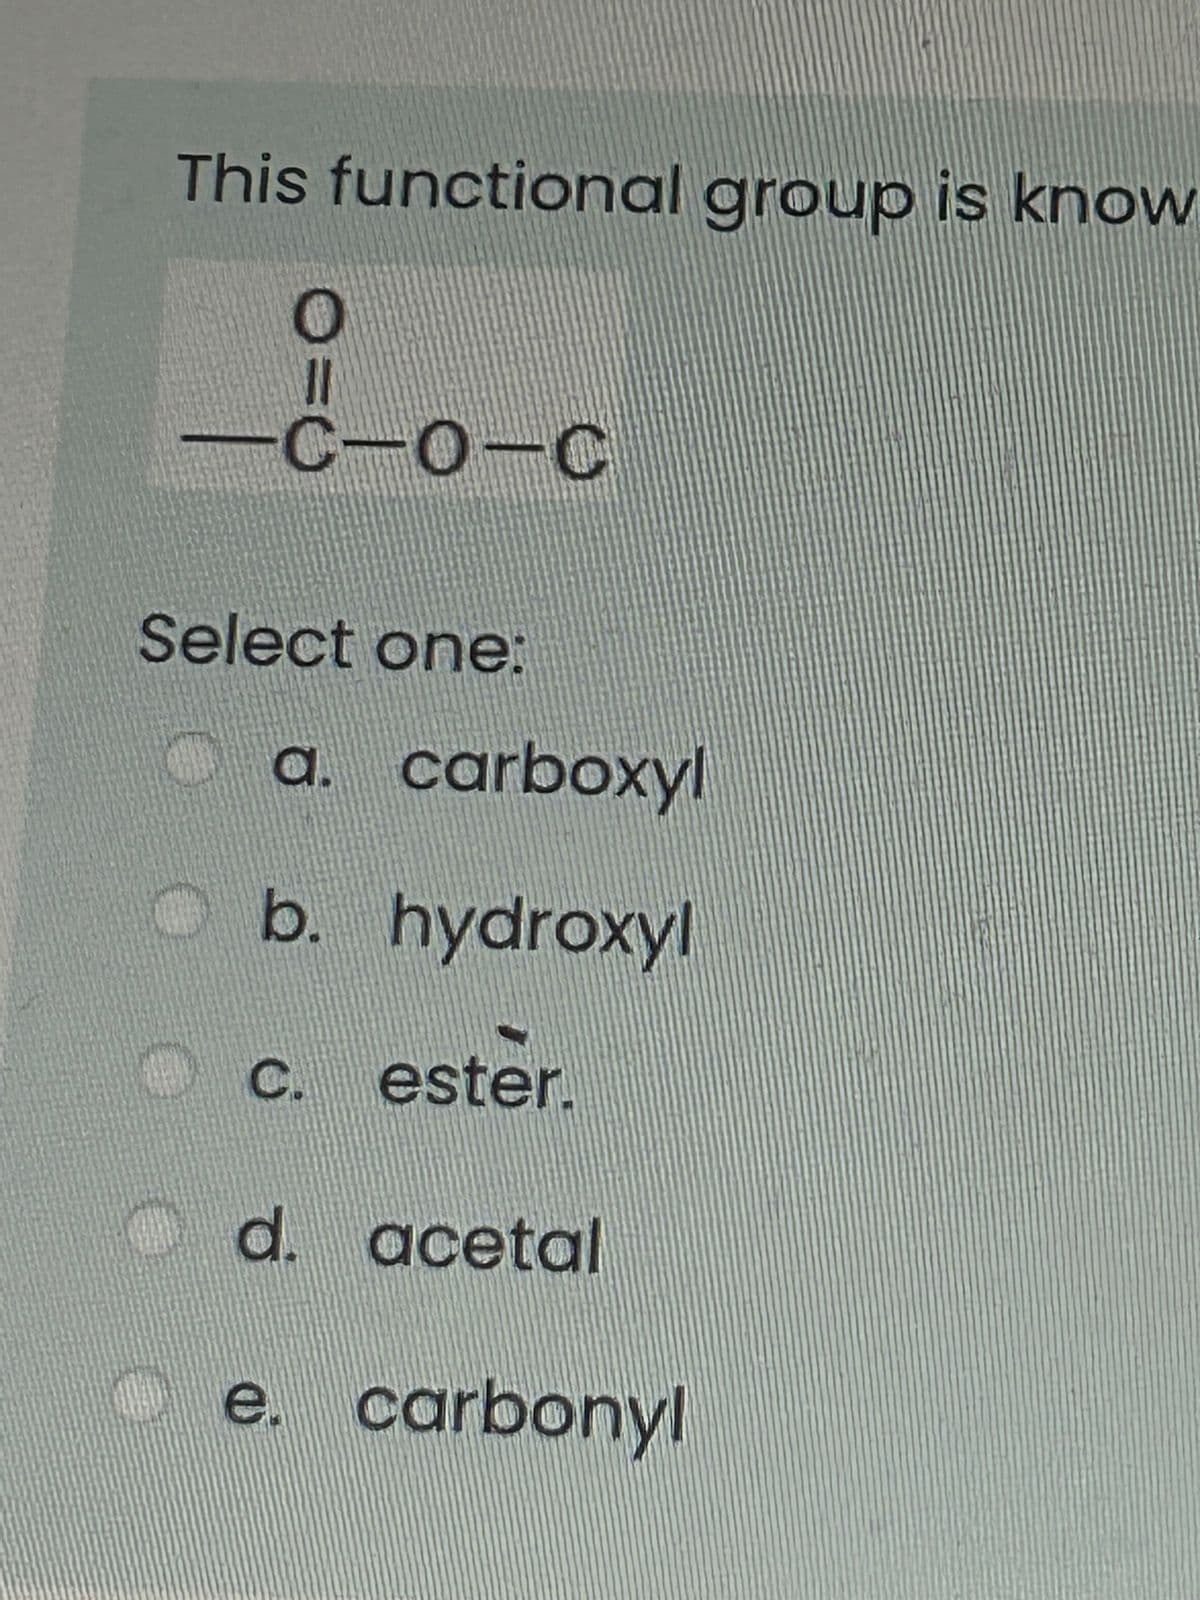 This functional group is know
O
G
O=0
-C-O-C
Select one:
O
$
a. carboxyl
b. hydroxyl
c. ester.
d. acetal
e. carbonyl